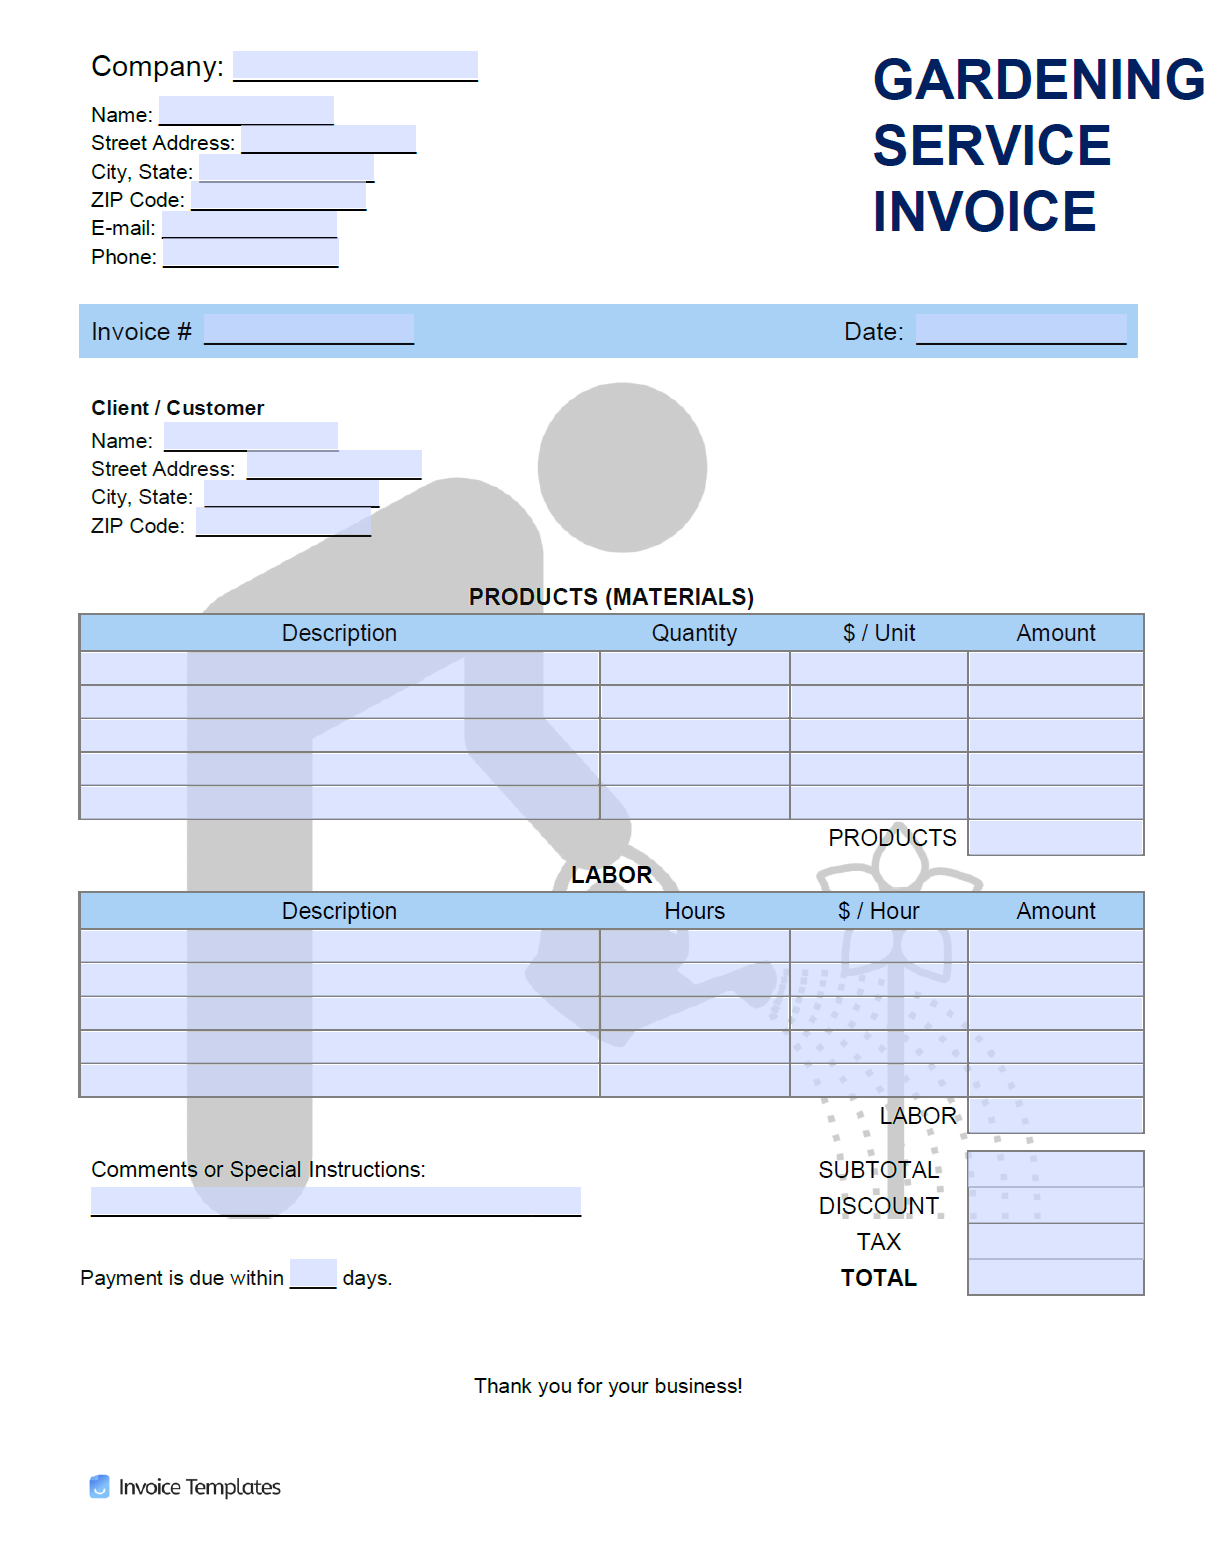 Free Gardening Service Invoice Template  PDF  WORD  EXCEL In Lawn Maintenance Invoice Template